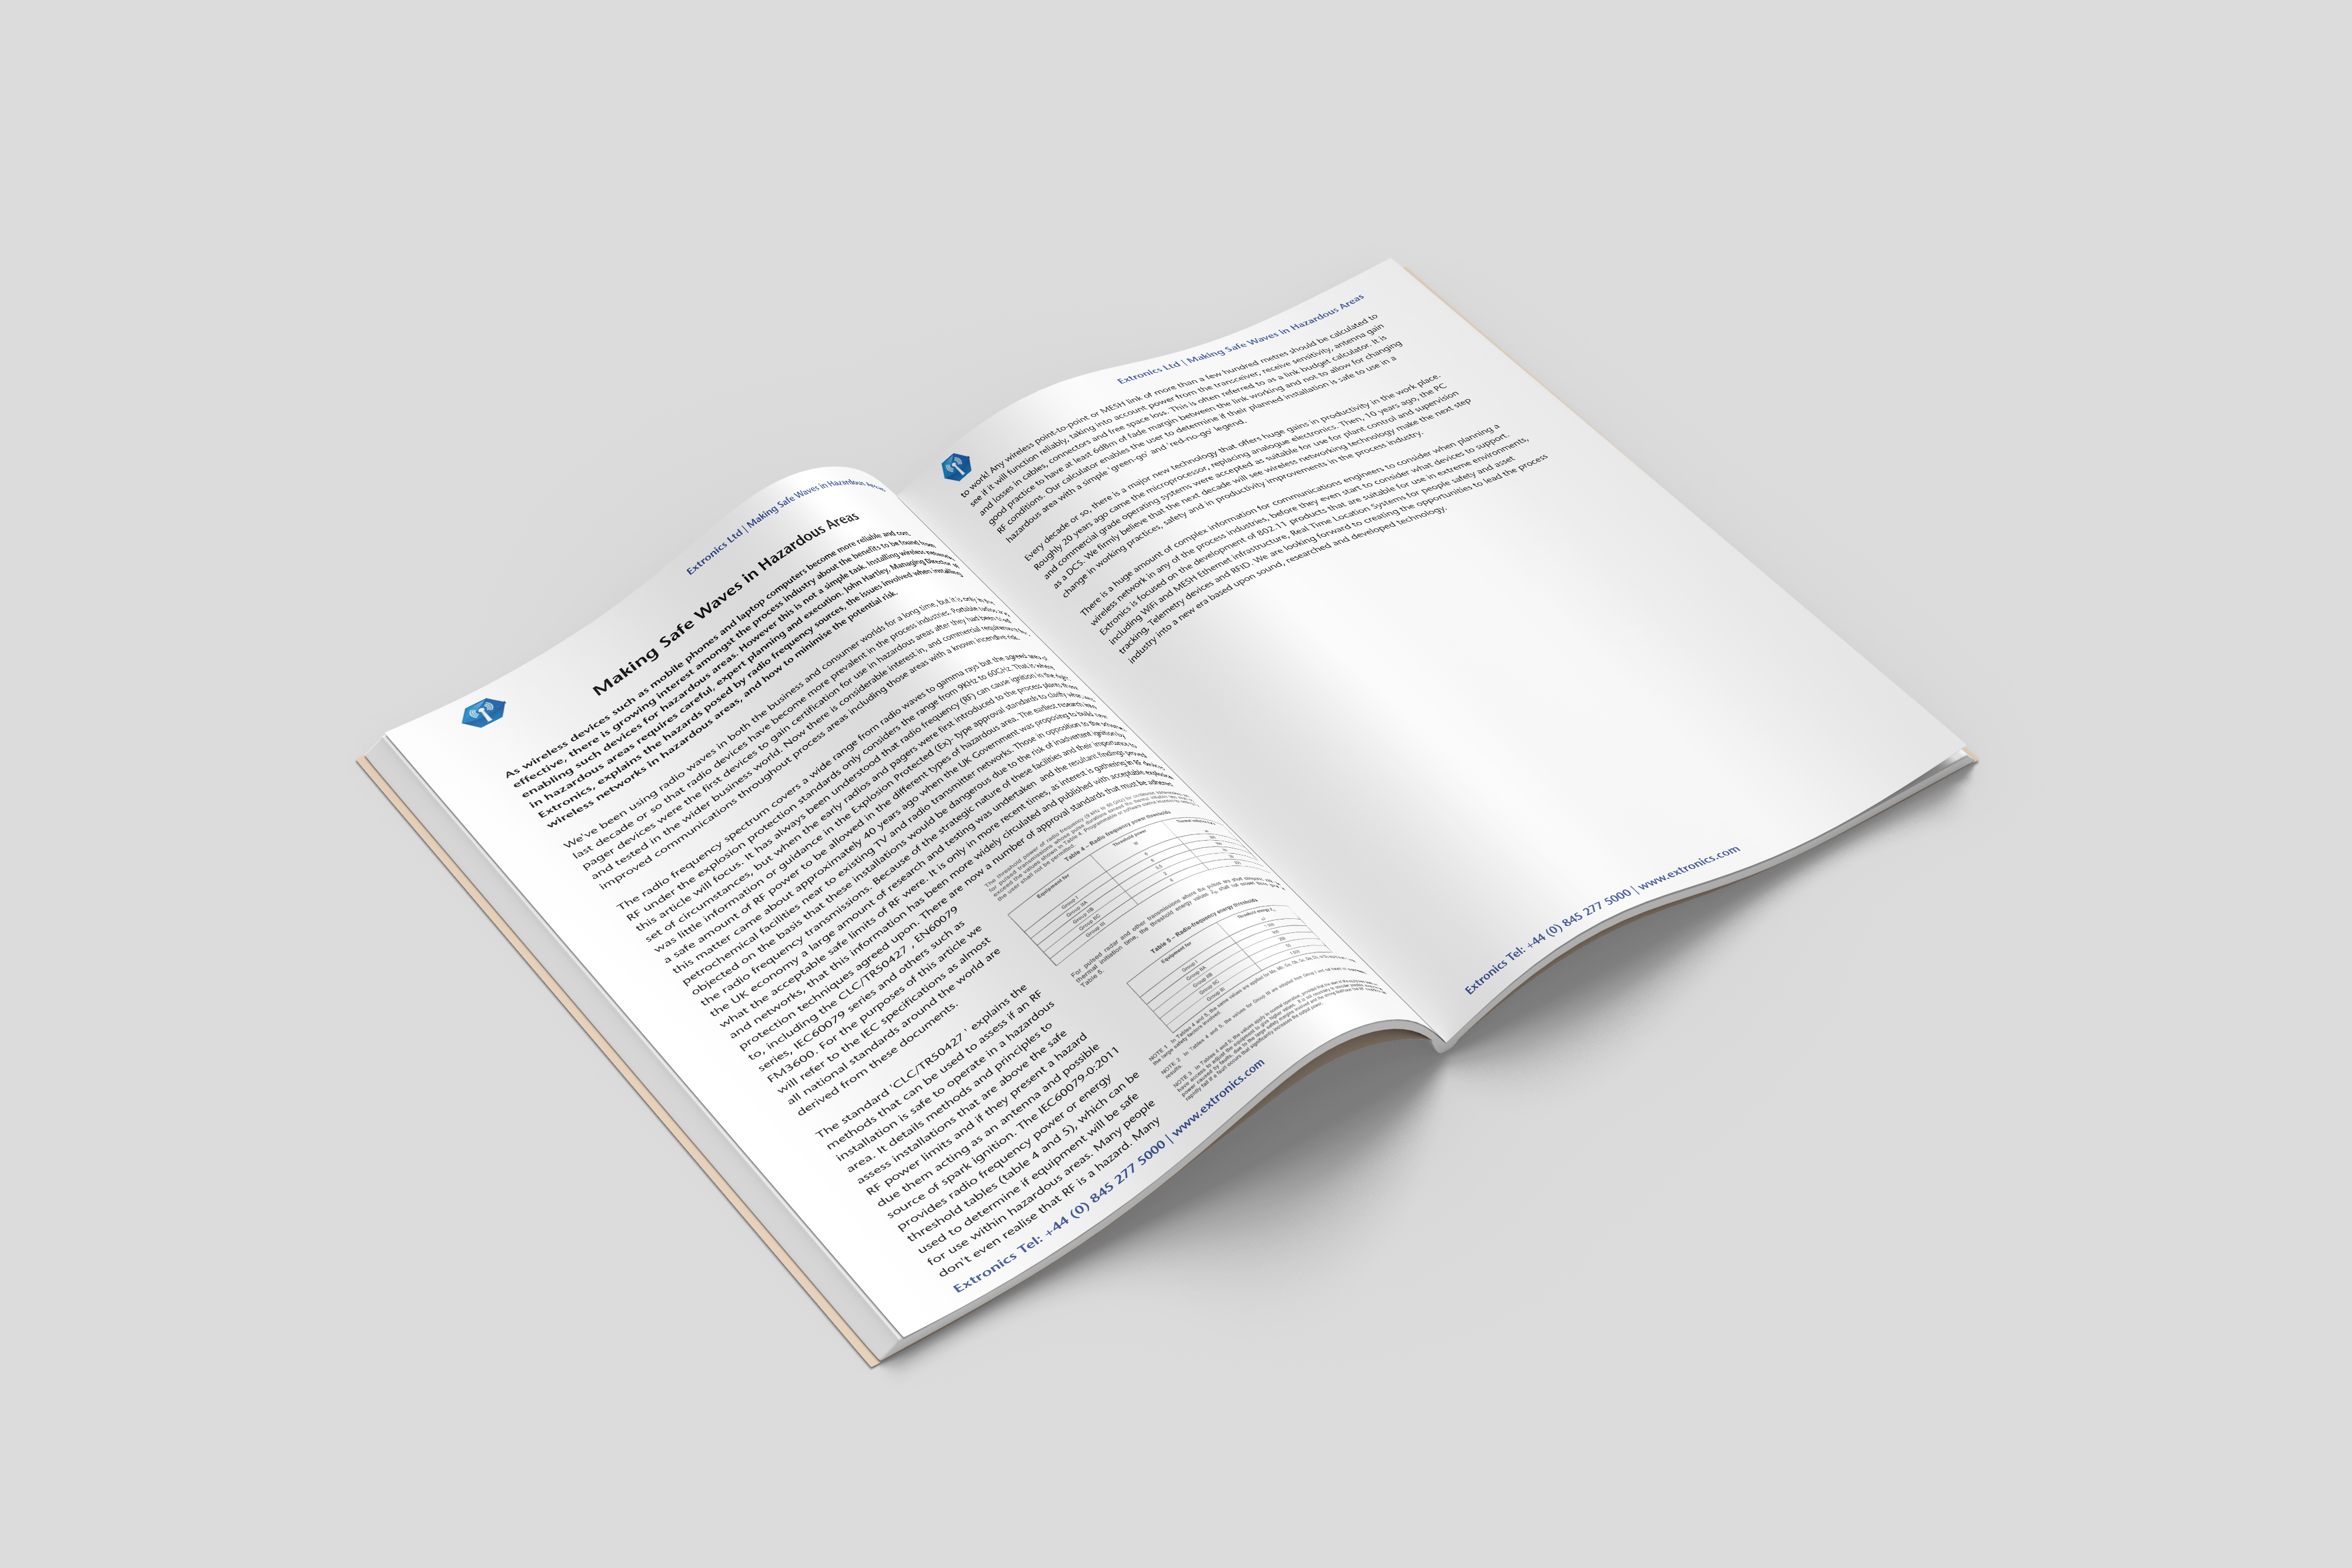 A Wireless White Paper inside pages 